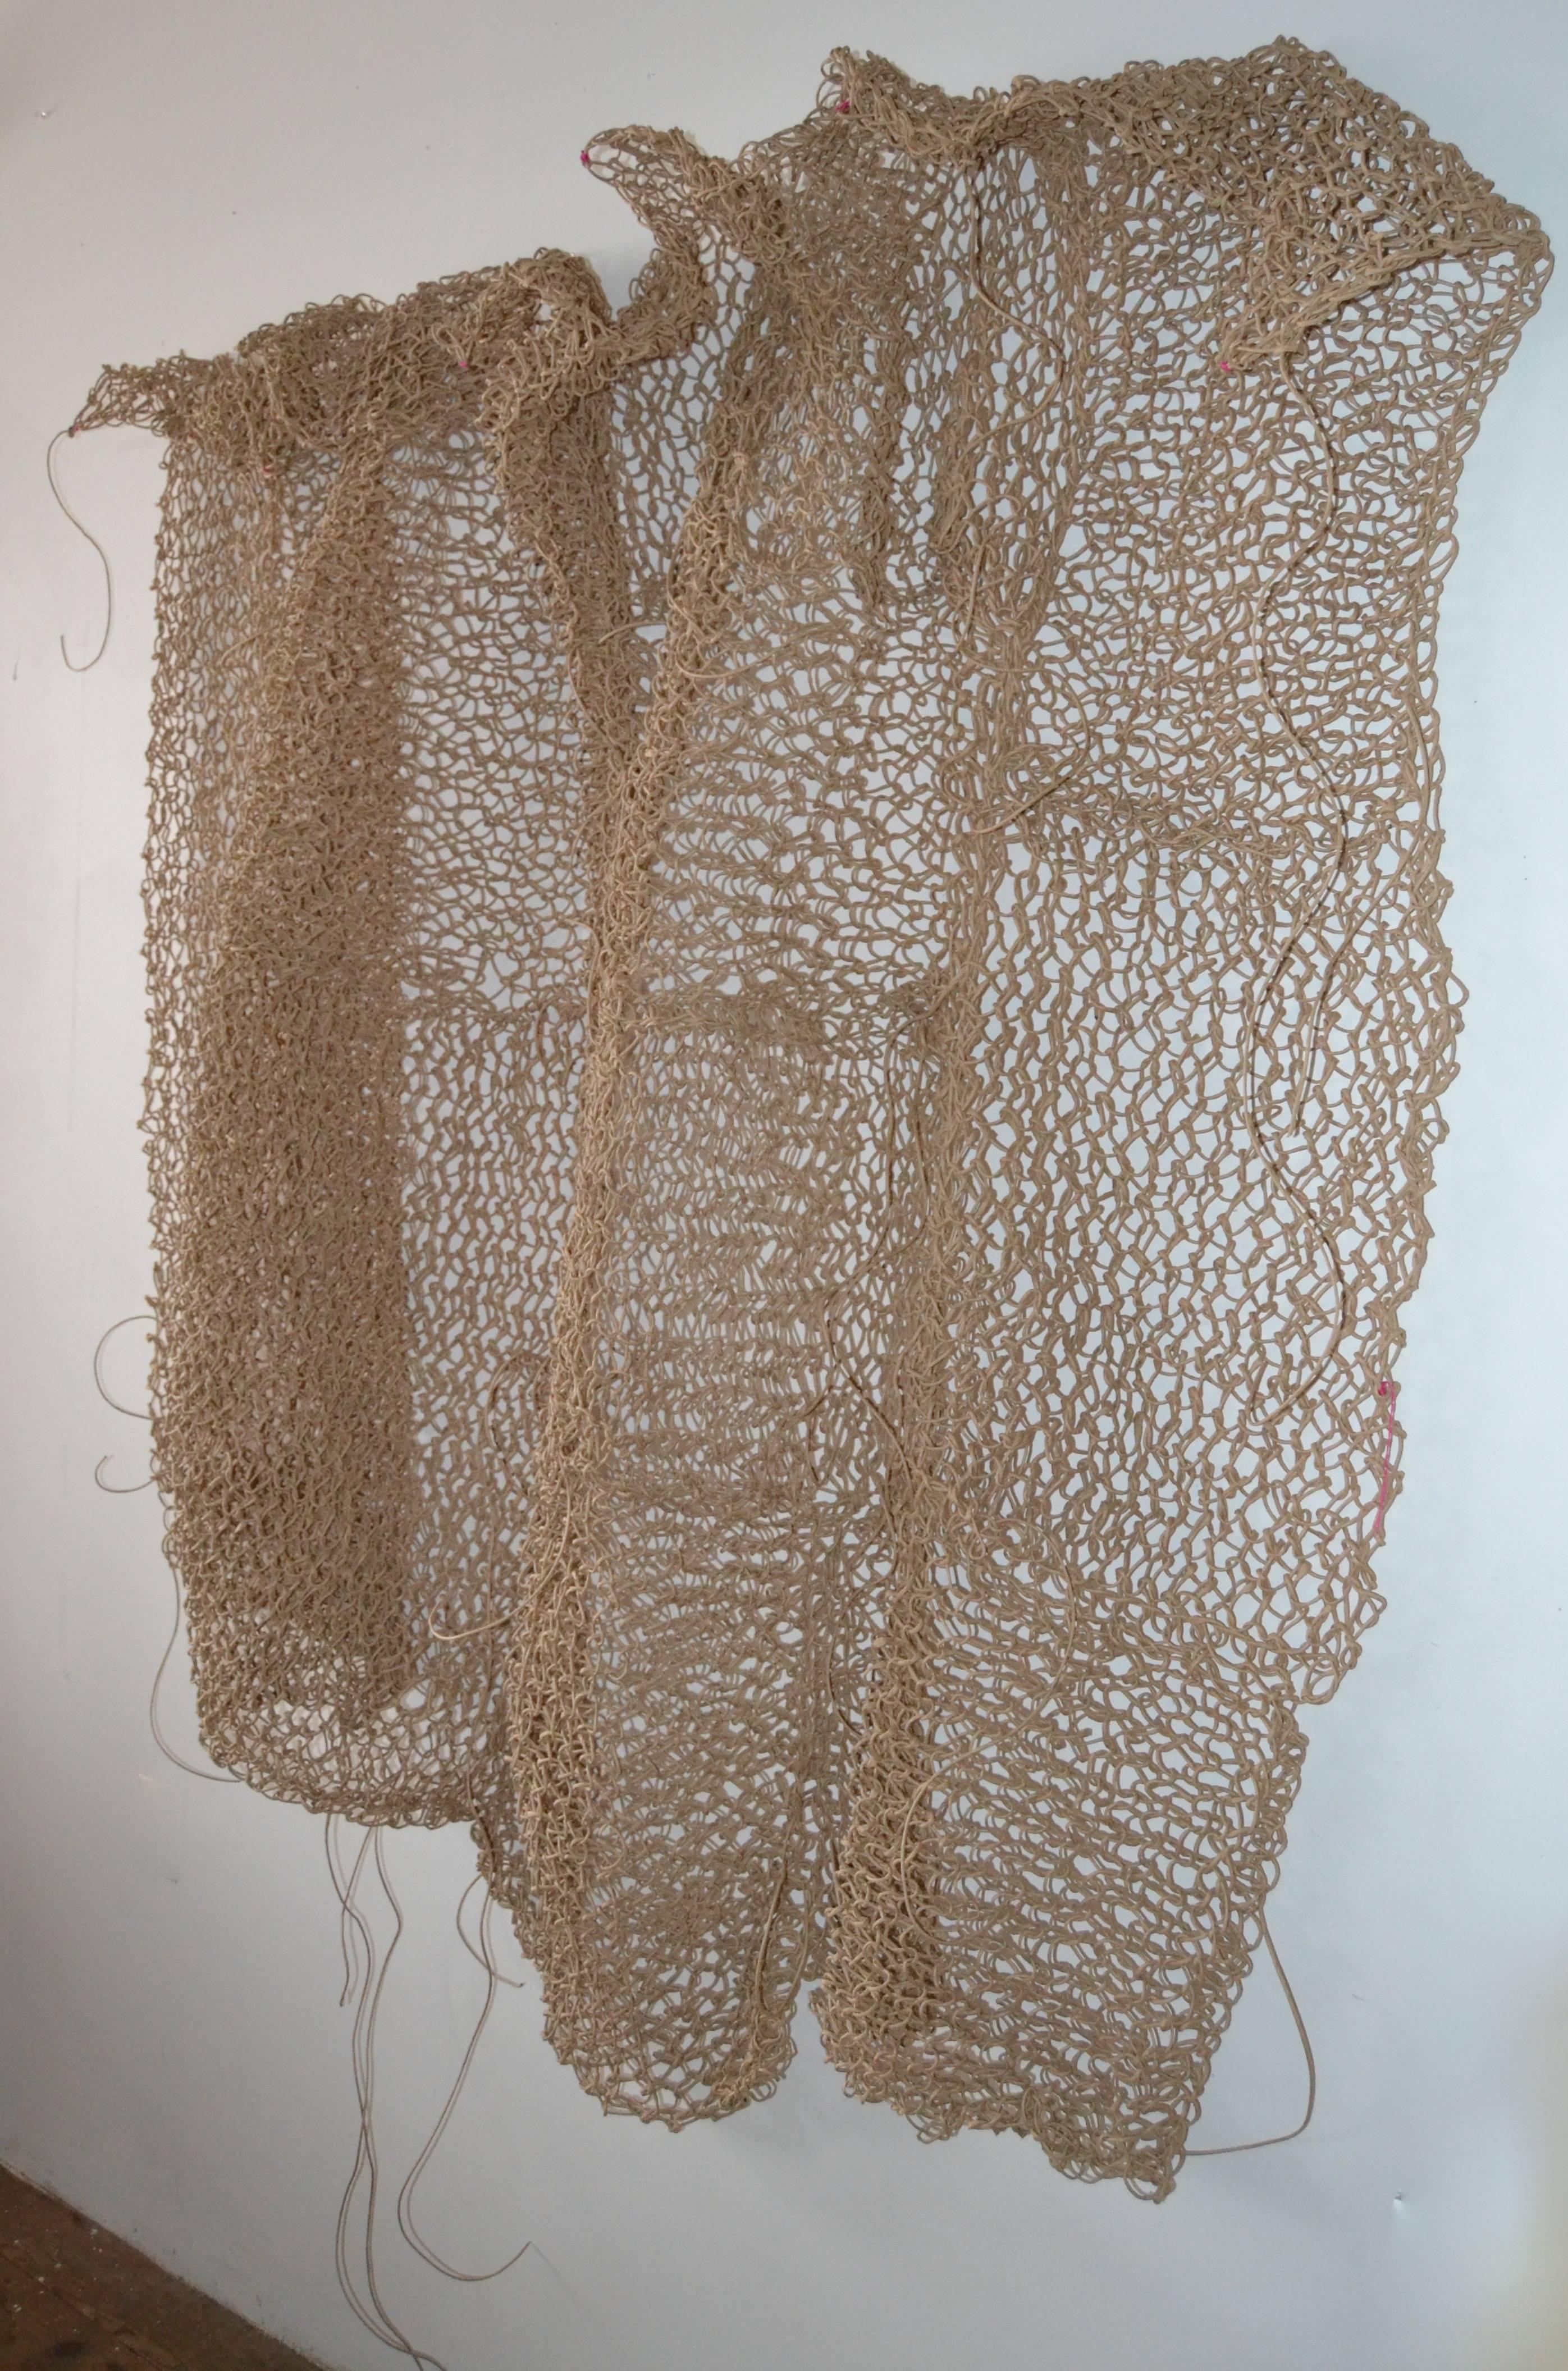 Large-scale knitted spun paper installation by the contemporary artist John Krynick. Wall sculpture evokes the nautical themes and interests of the artist. Dimensions variable. Includes installation instructions, artist or his assistant may be